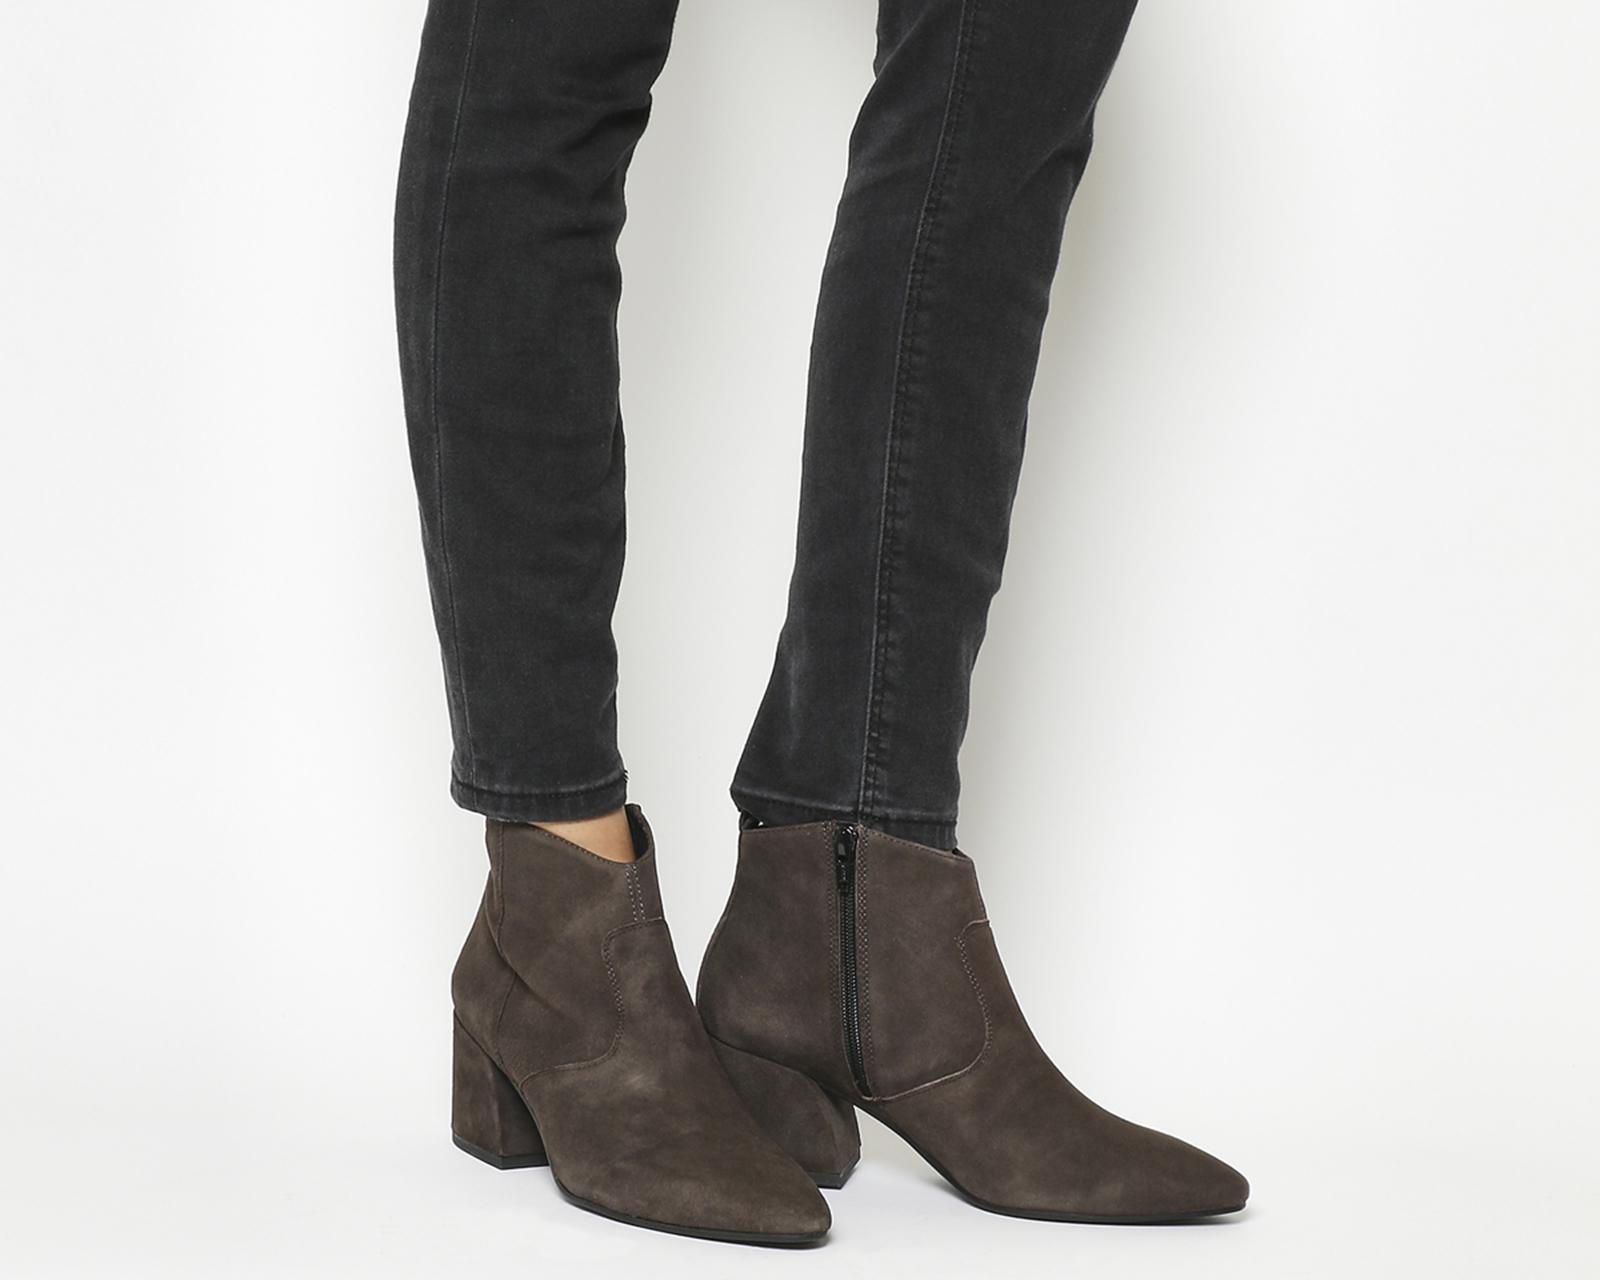 Vagabond Suede Olivia Ankle Boots in Grey (Gray) - Lyst